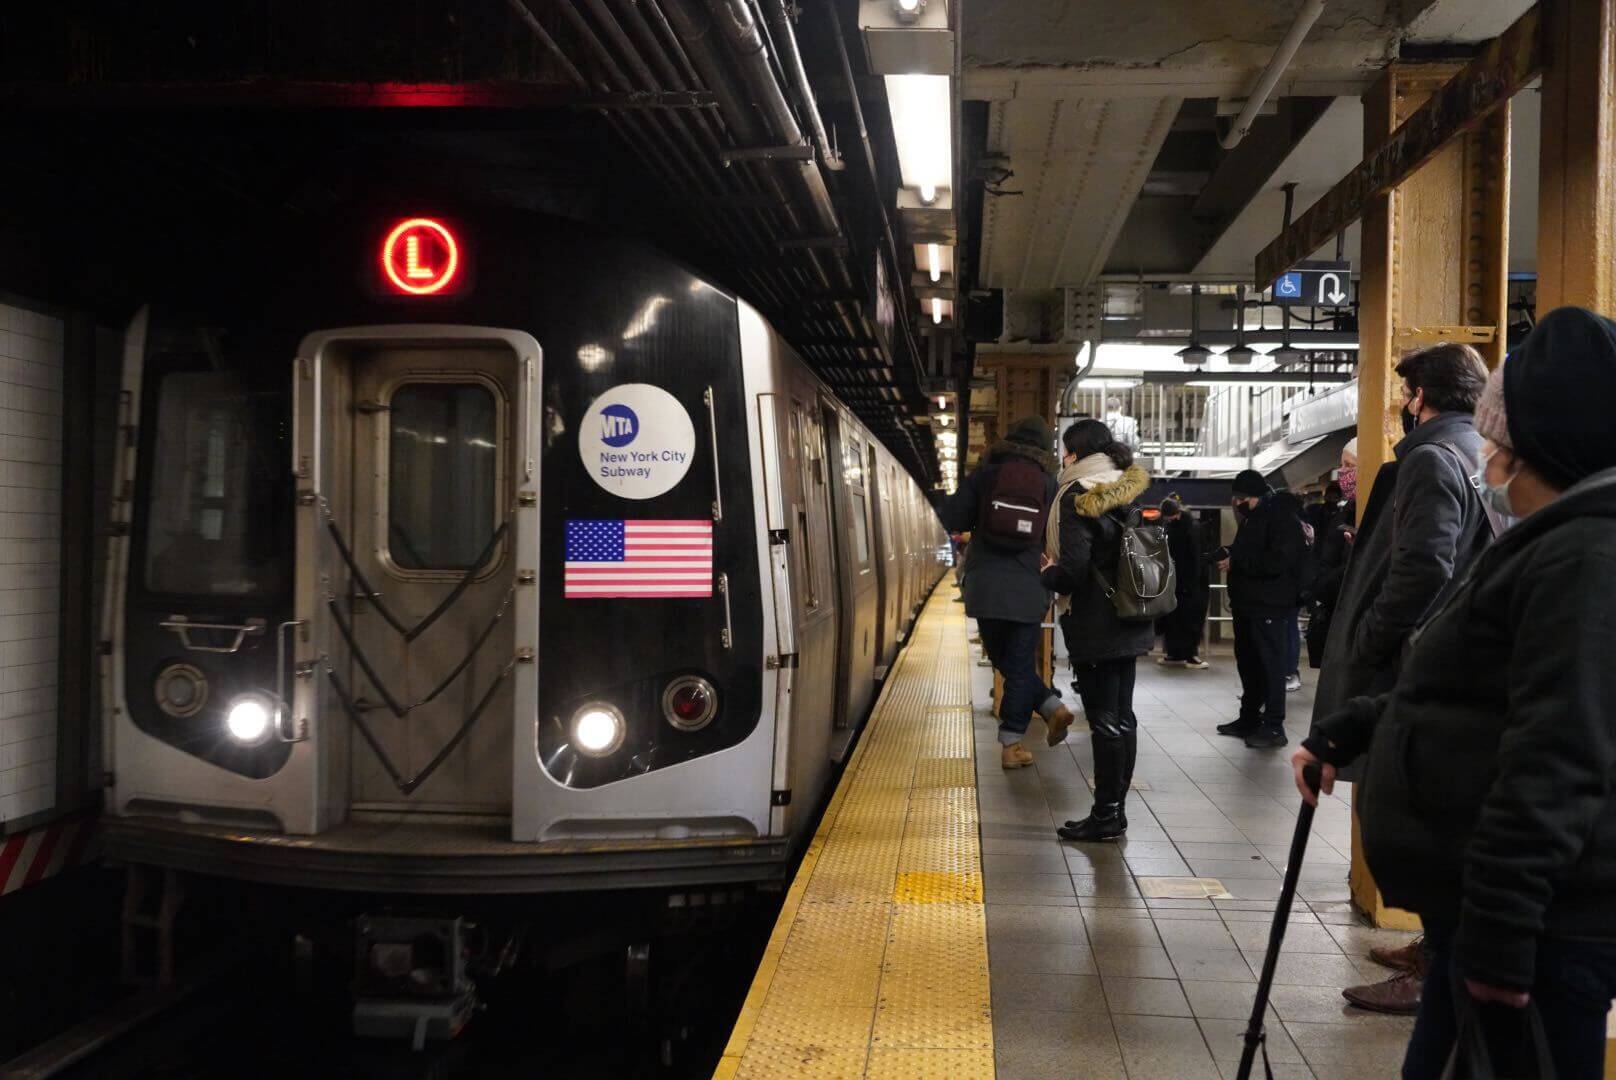 The Best Winter Sport Spots by MTA Train or Subway